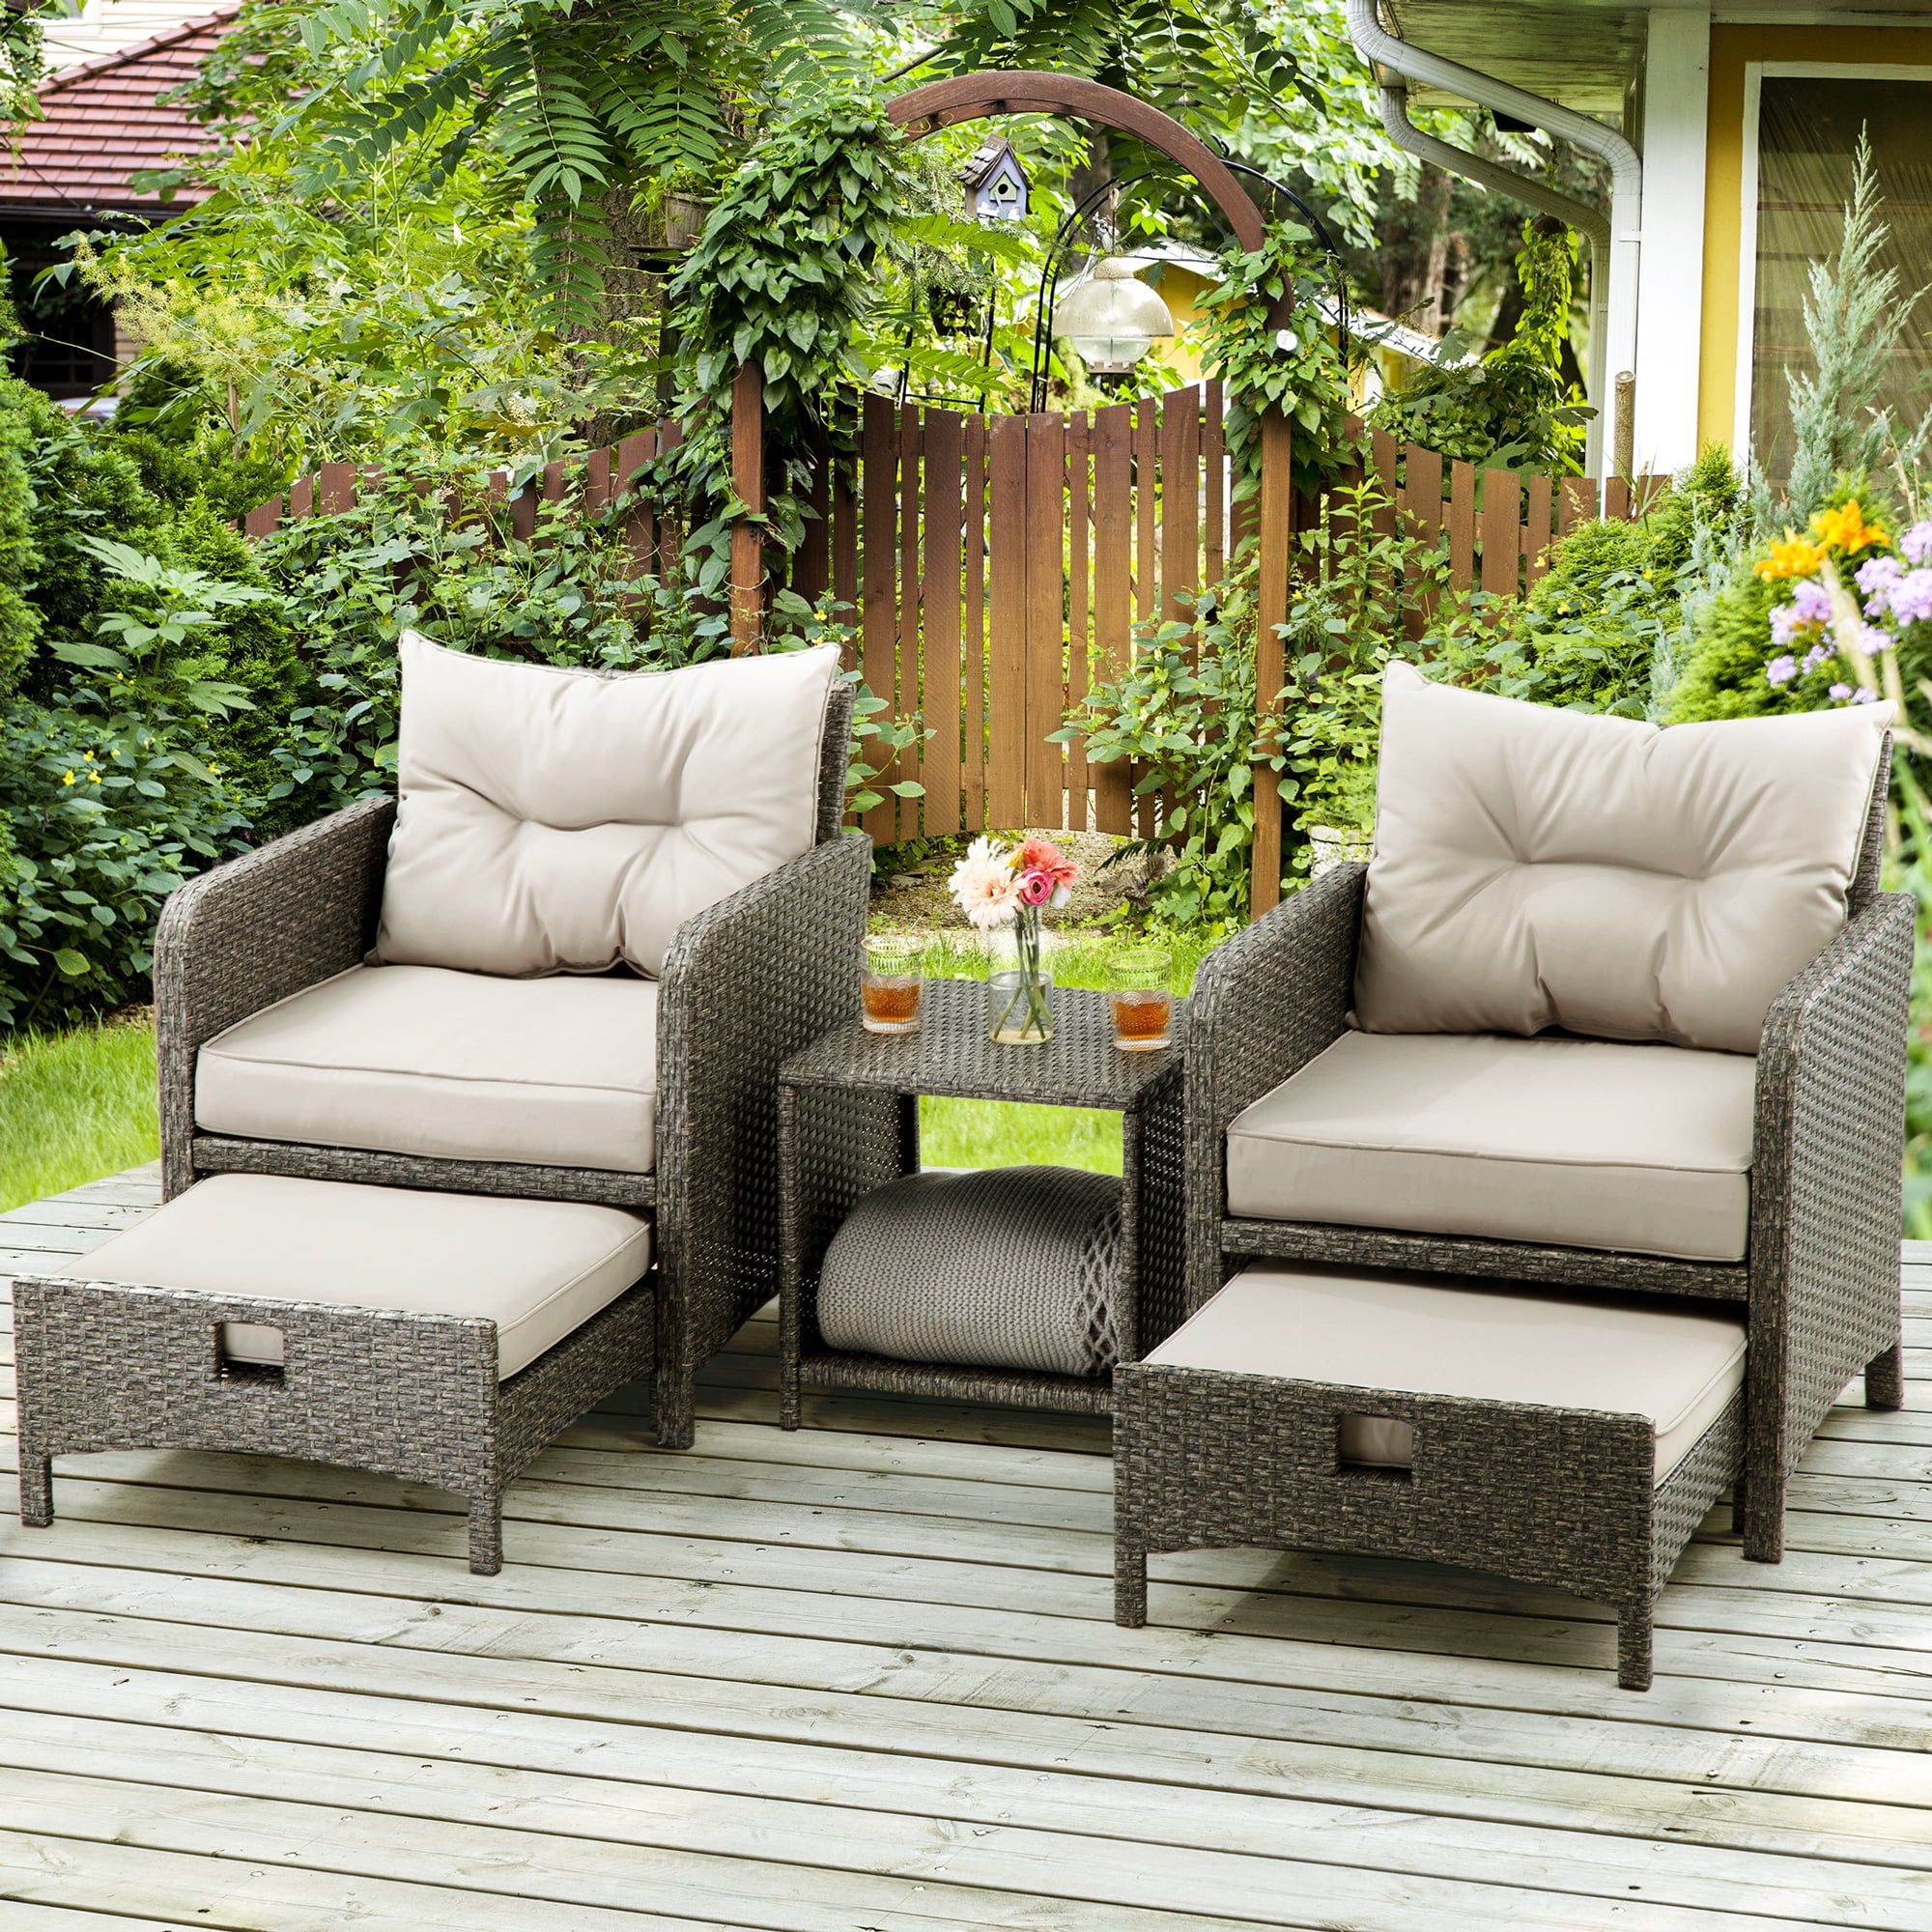 Pamapic 5 Pieces Wicker Patio Furniture Set Outdoor Patio Chairs With  Ottomans (gray) – Walmart Pertaining To Ottomans Patio Furniture Set (Photo 1 of 15)